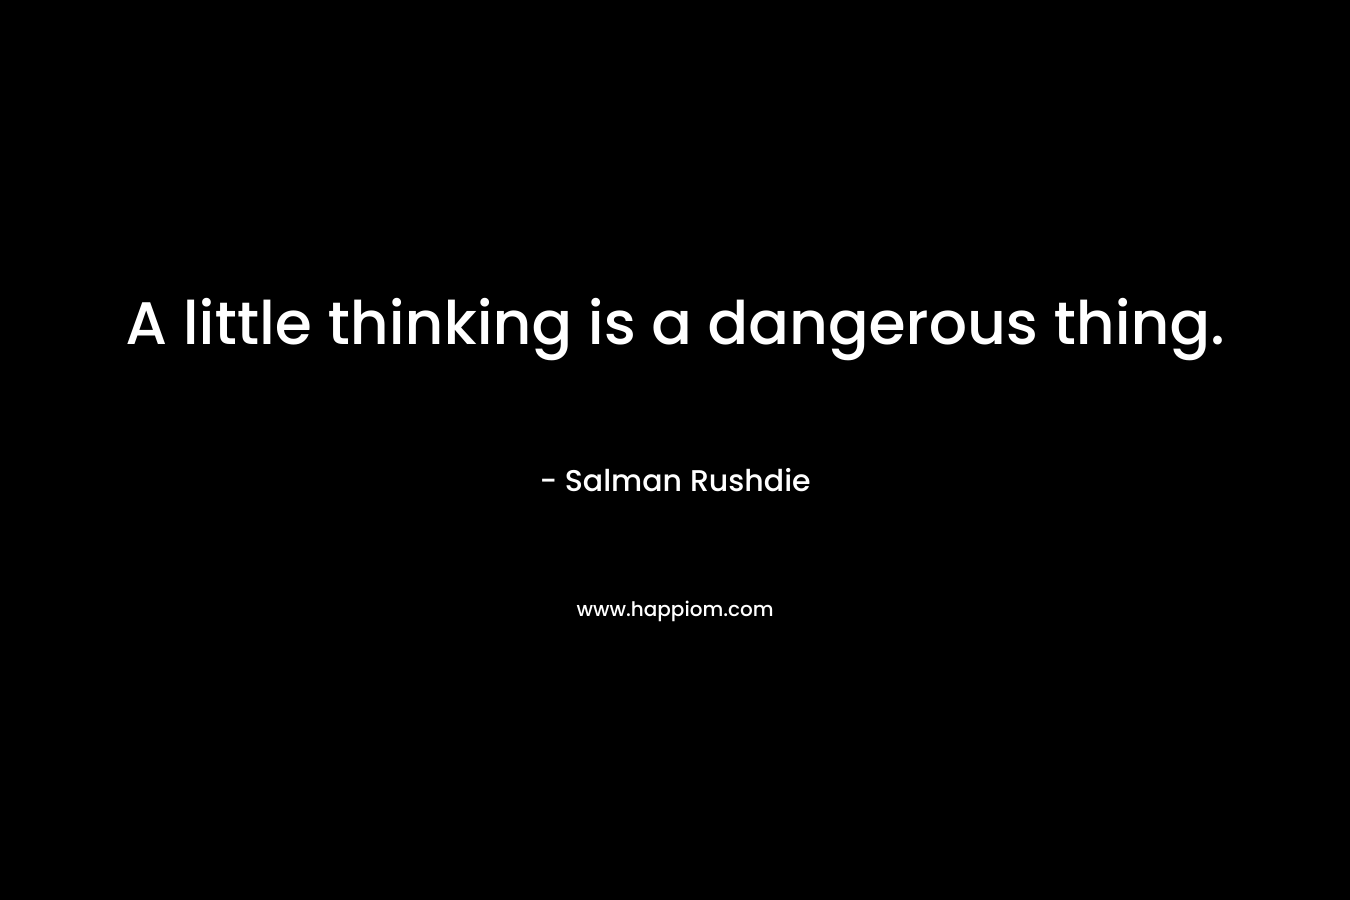 A little thinking is a dangerous thing. – Salman Rushdie